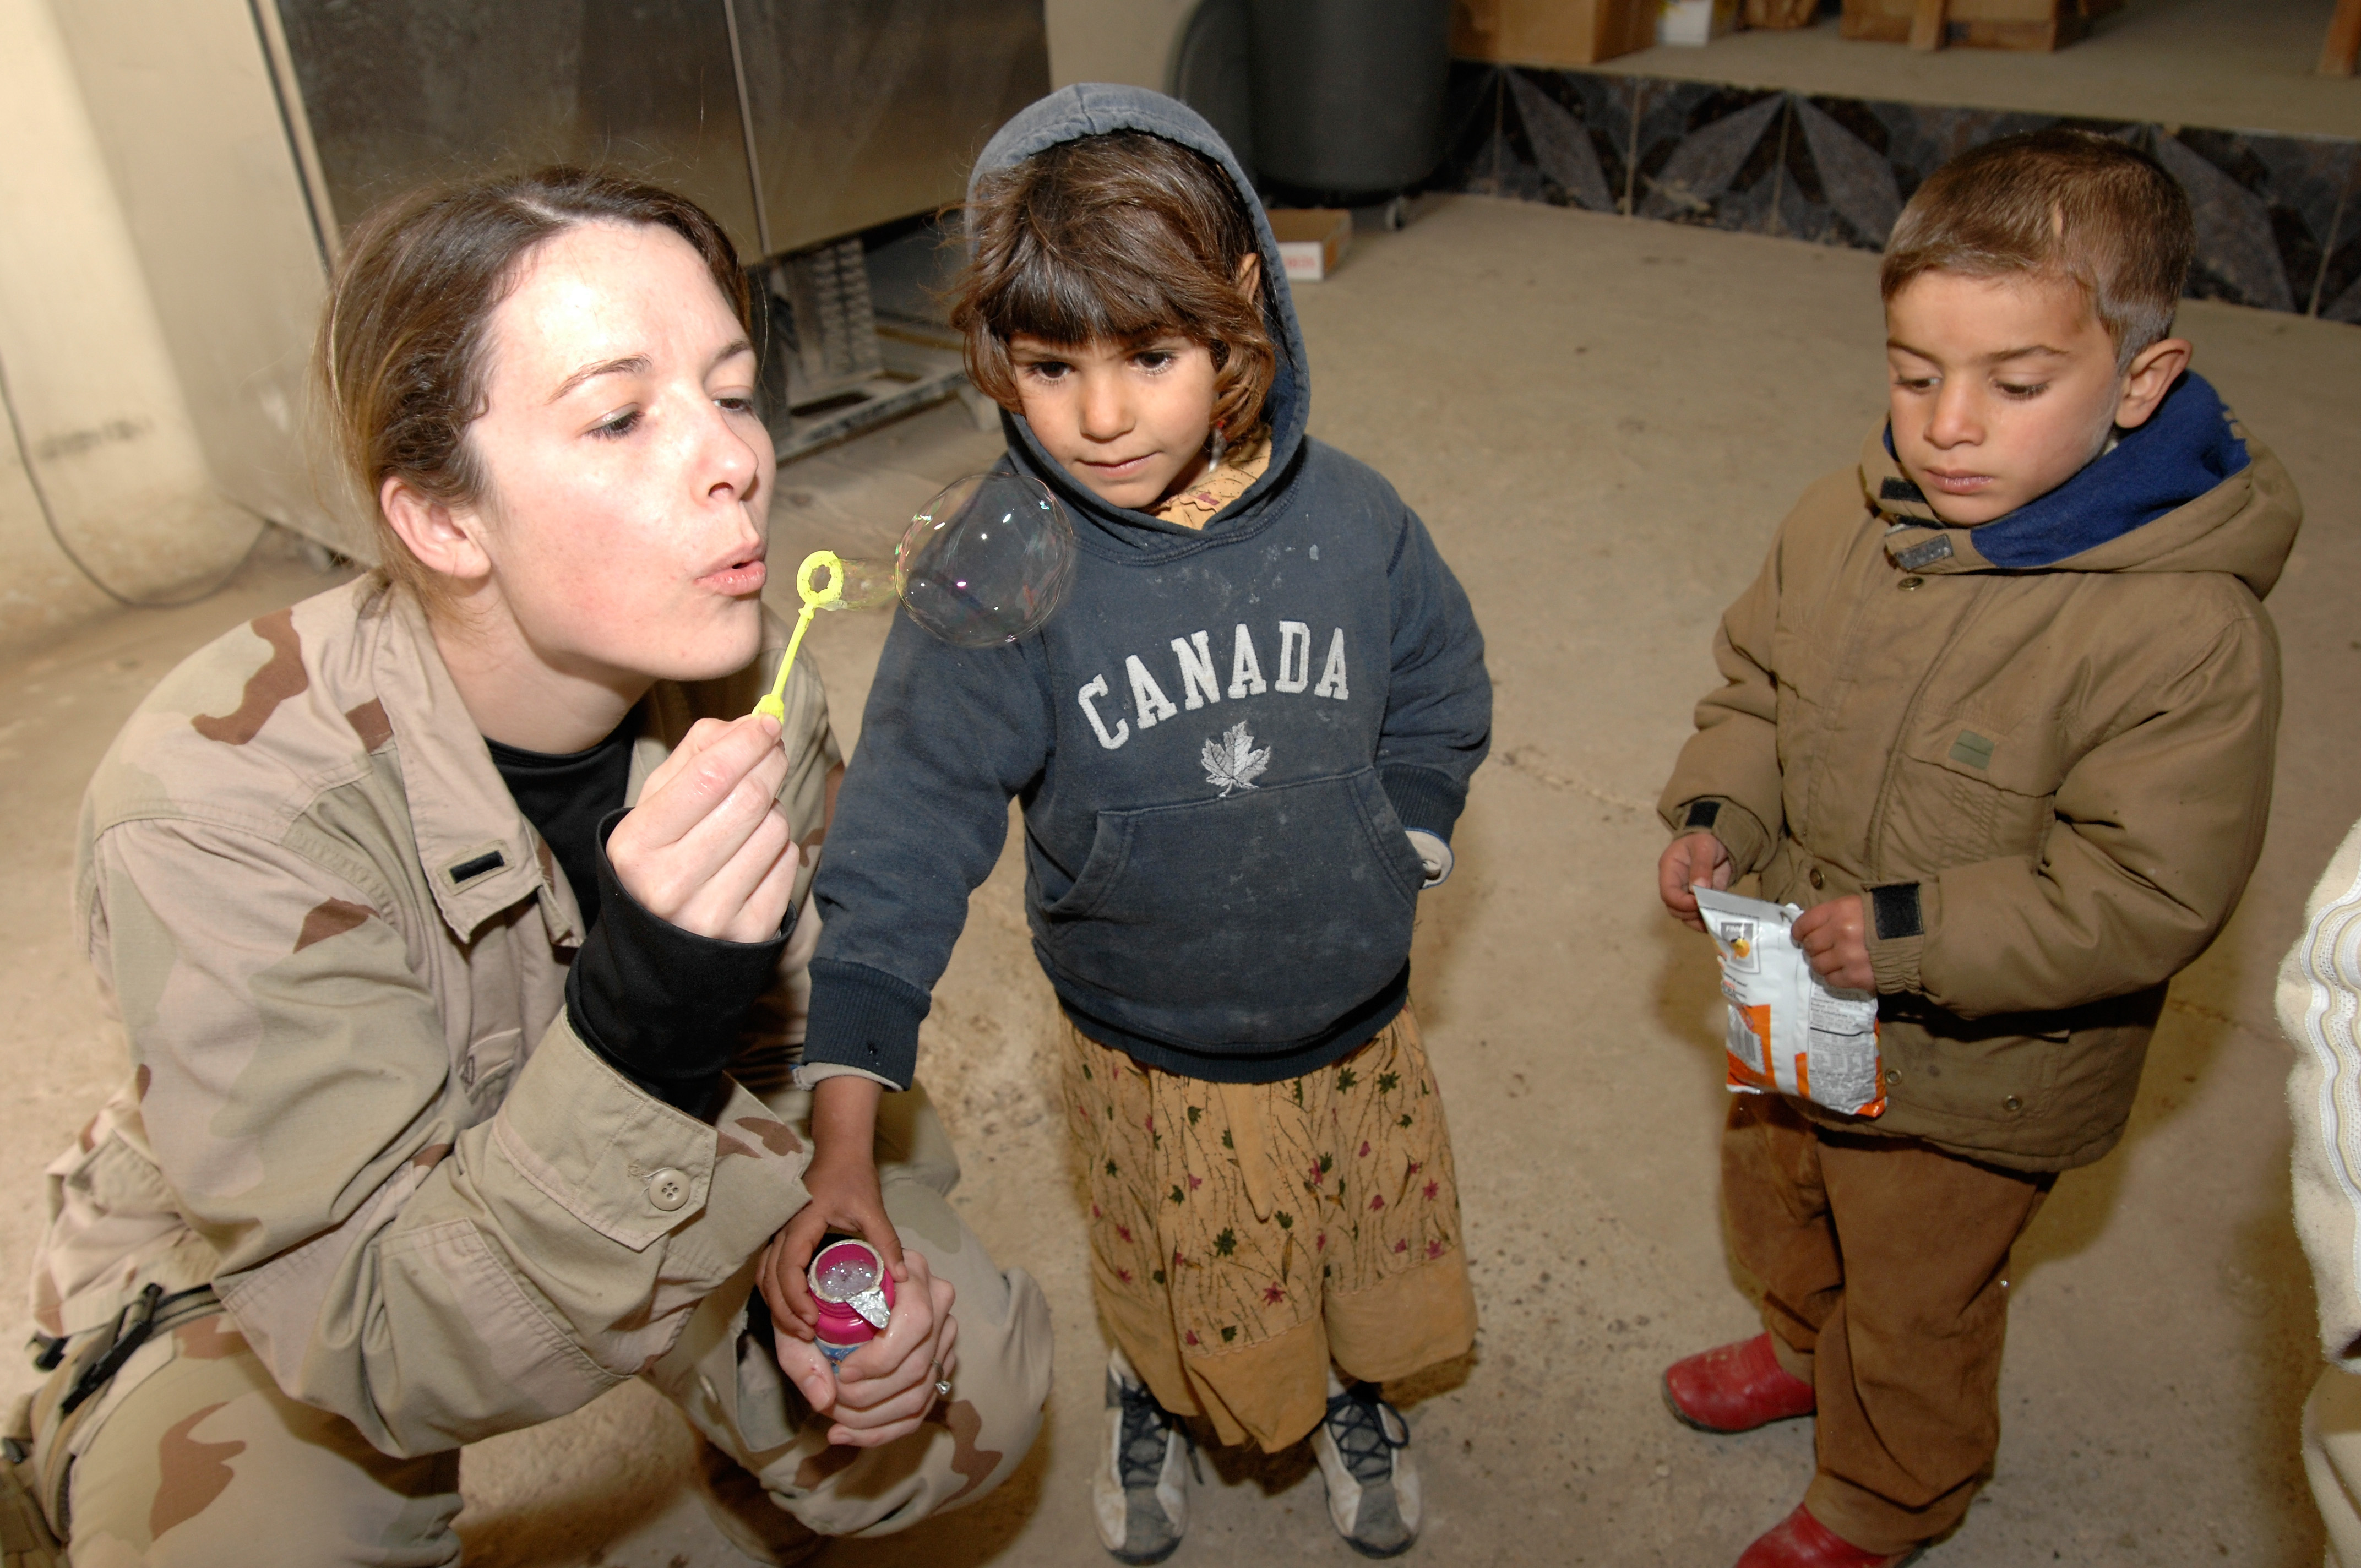 US Navy 070116-N-8218W-030 U.S. Air Force 1st Lt. Lea Ann Fracasso blows bubbles for some Iraqi children at the Civilian Military Operations Center (CMOC) near Baghdad, Iraq